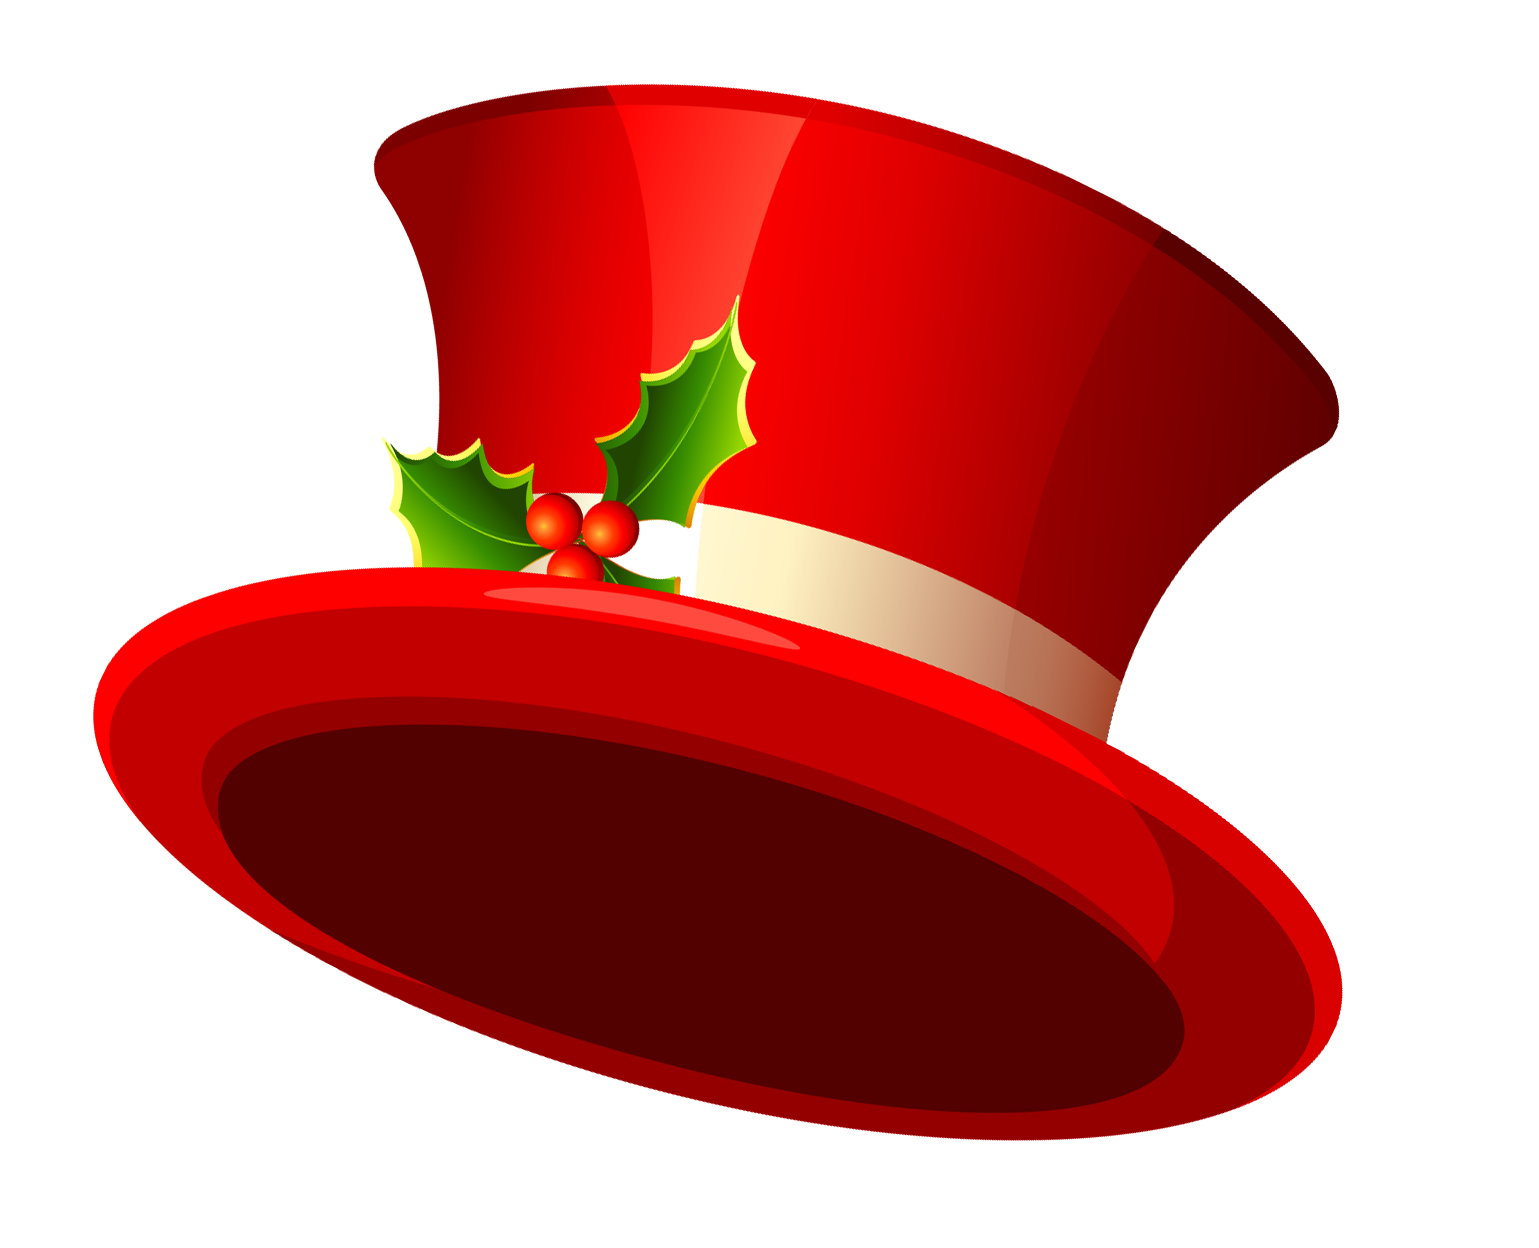 red hat clip art download - photo #35